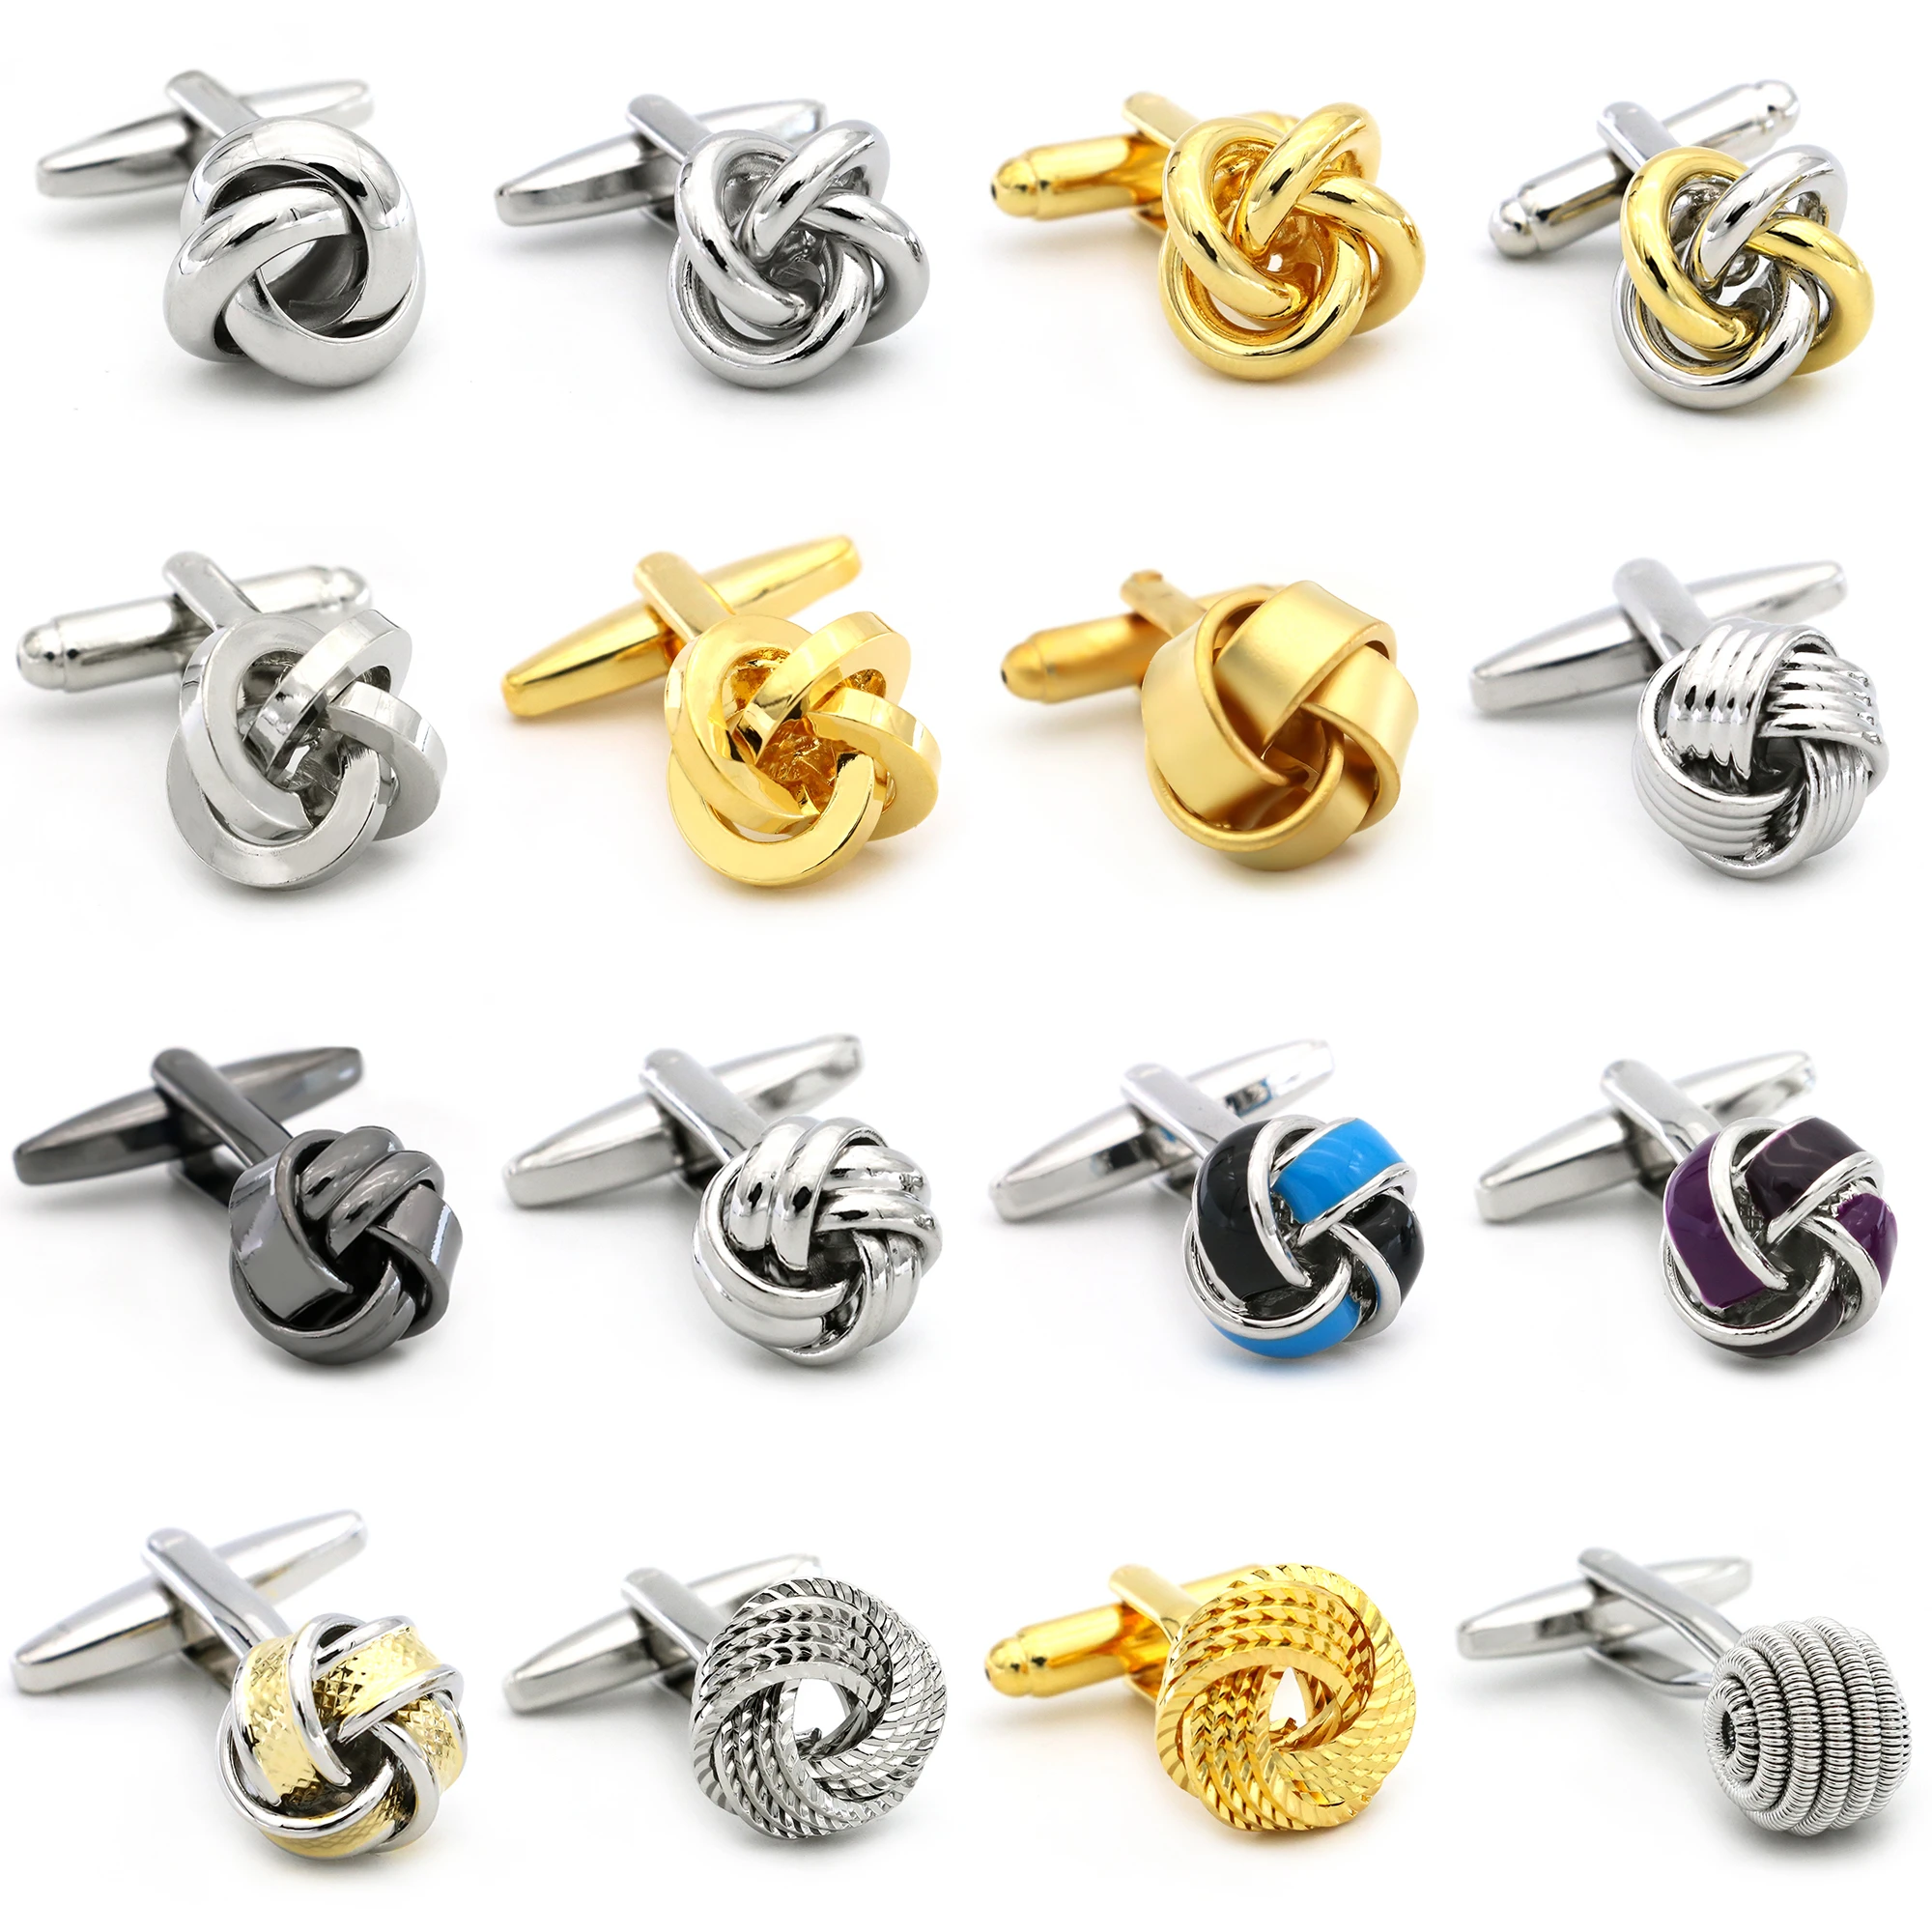 Free Shipping Metal Knot Cufflinks Gold Color Knot Design Hotsale Copper Material Cuff Links Whoelsale&retail